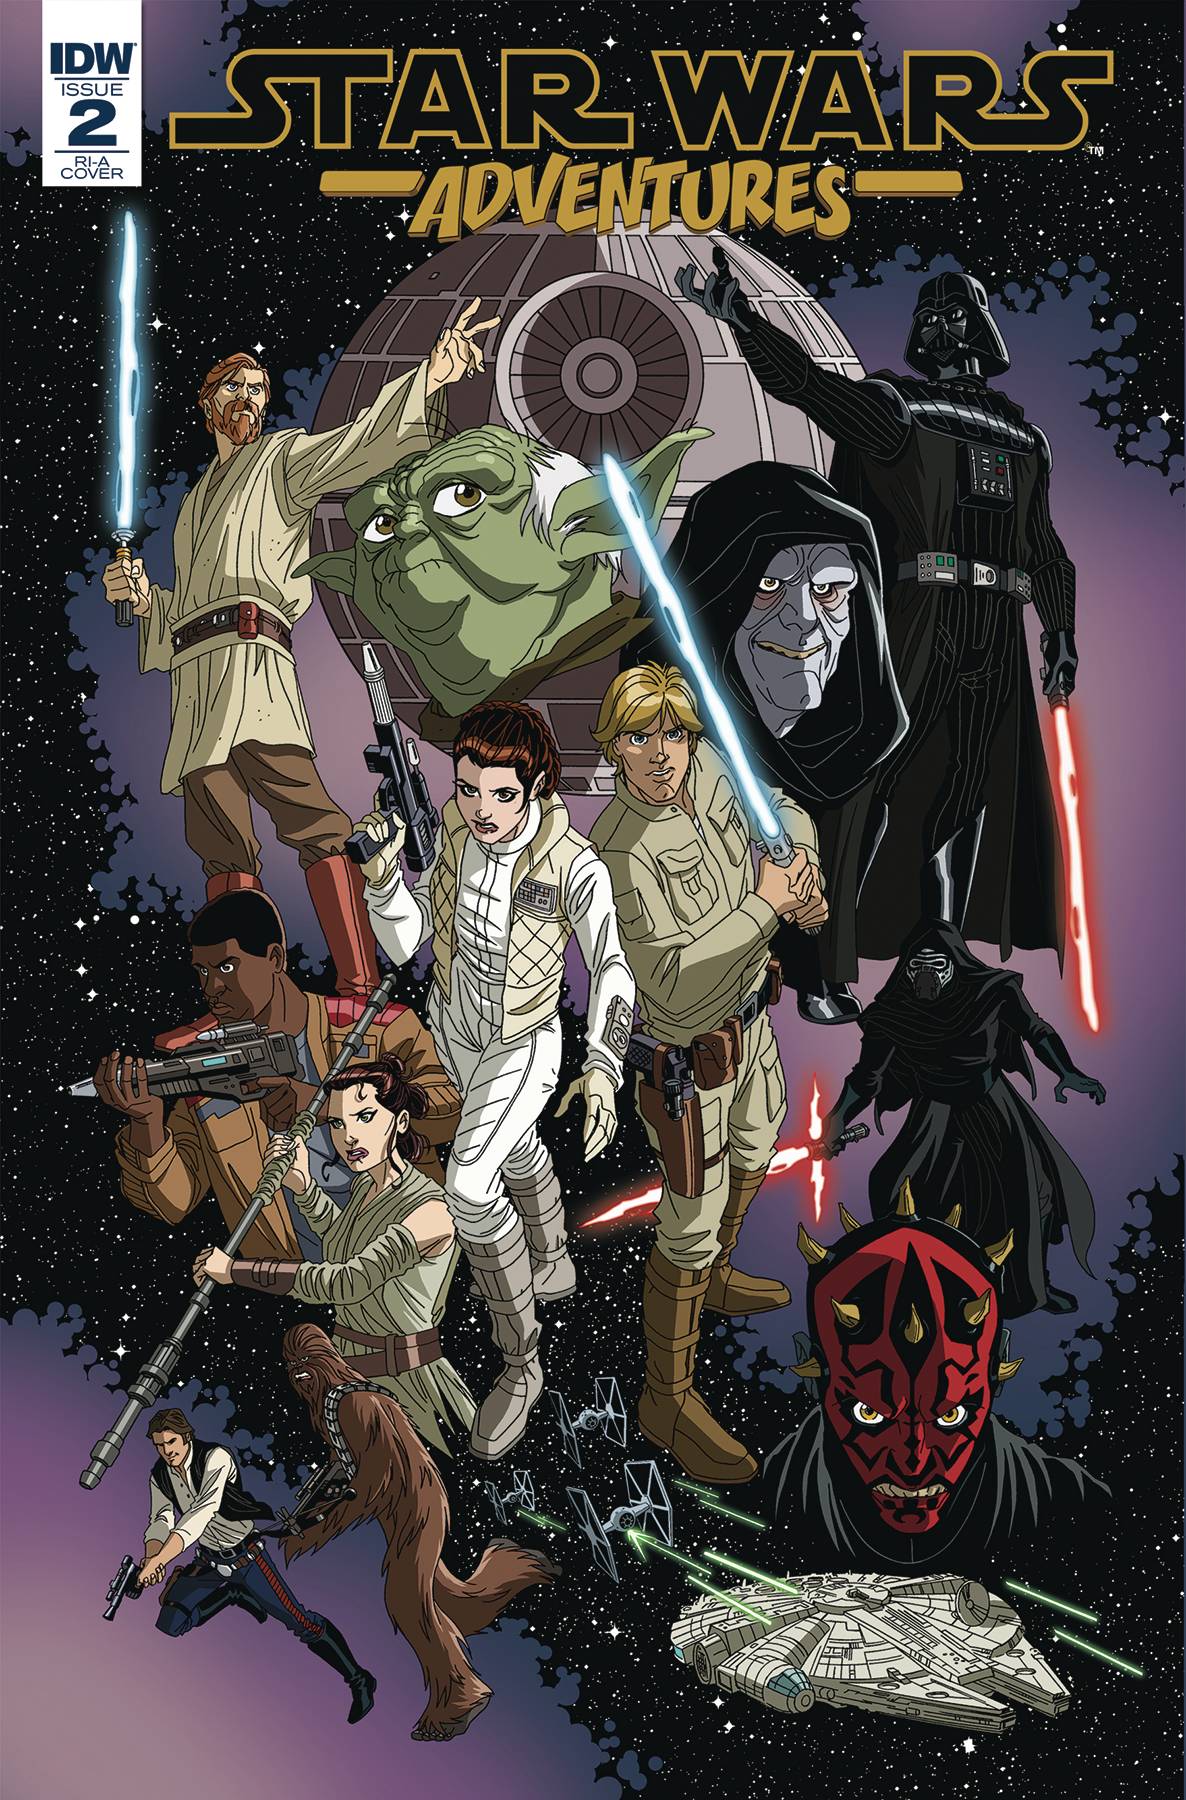 Star Wars Adventures #2 1 for 10 Incentive